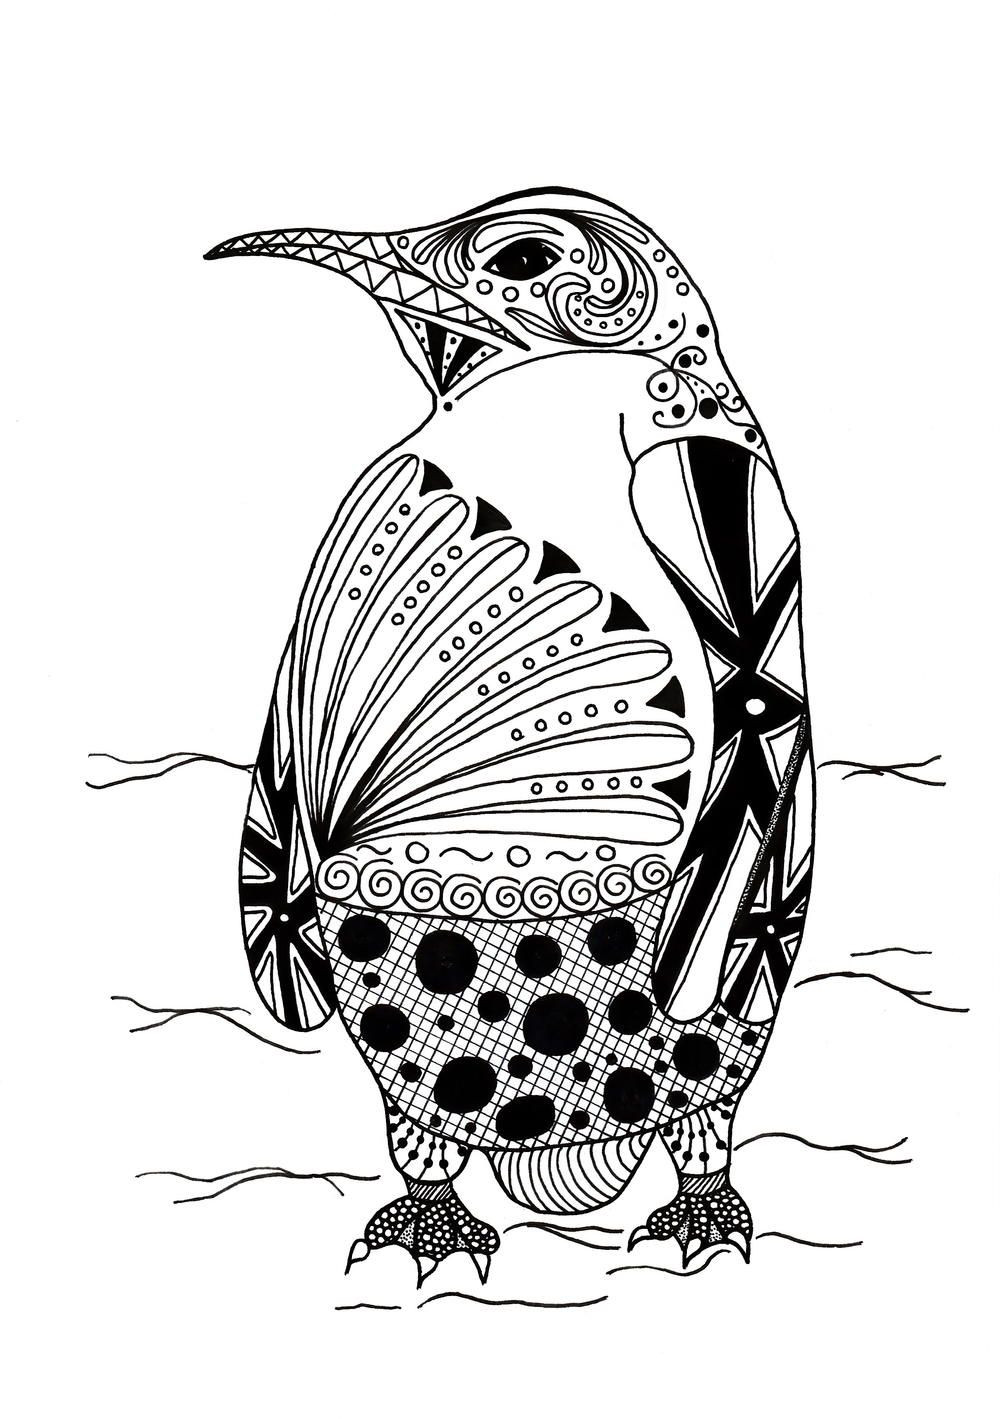 Printable Animal Coloring Pages For Adults
 Intricate Penguin Adult Coloring Page